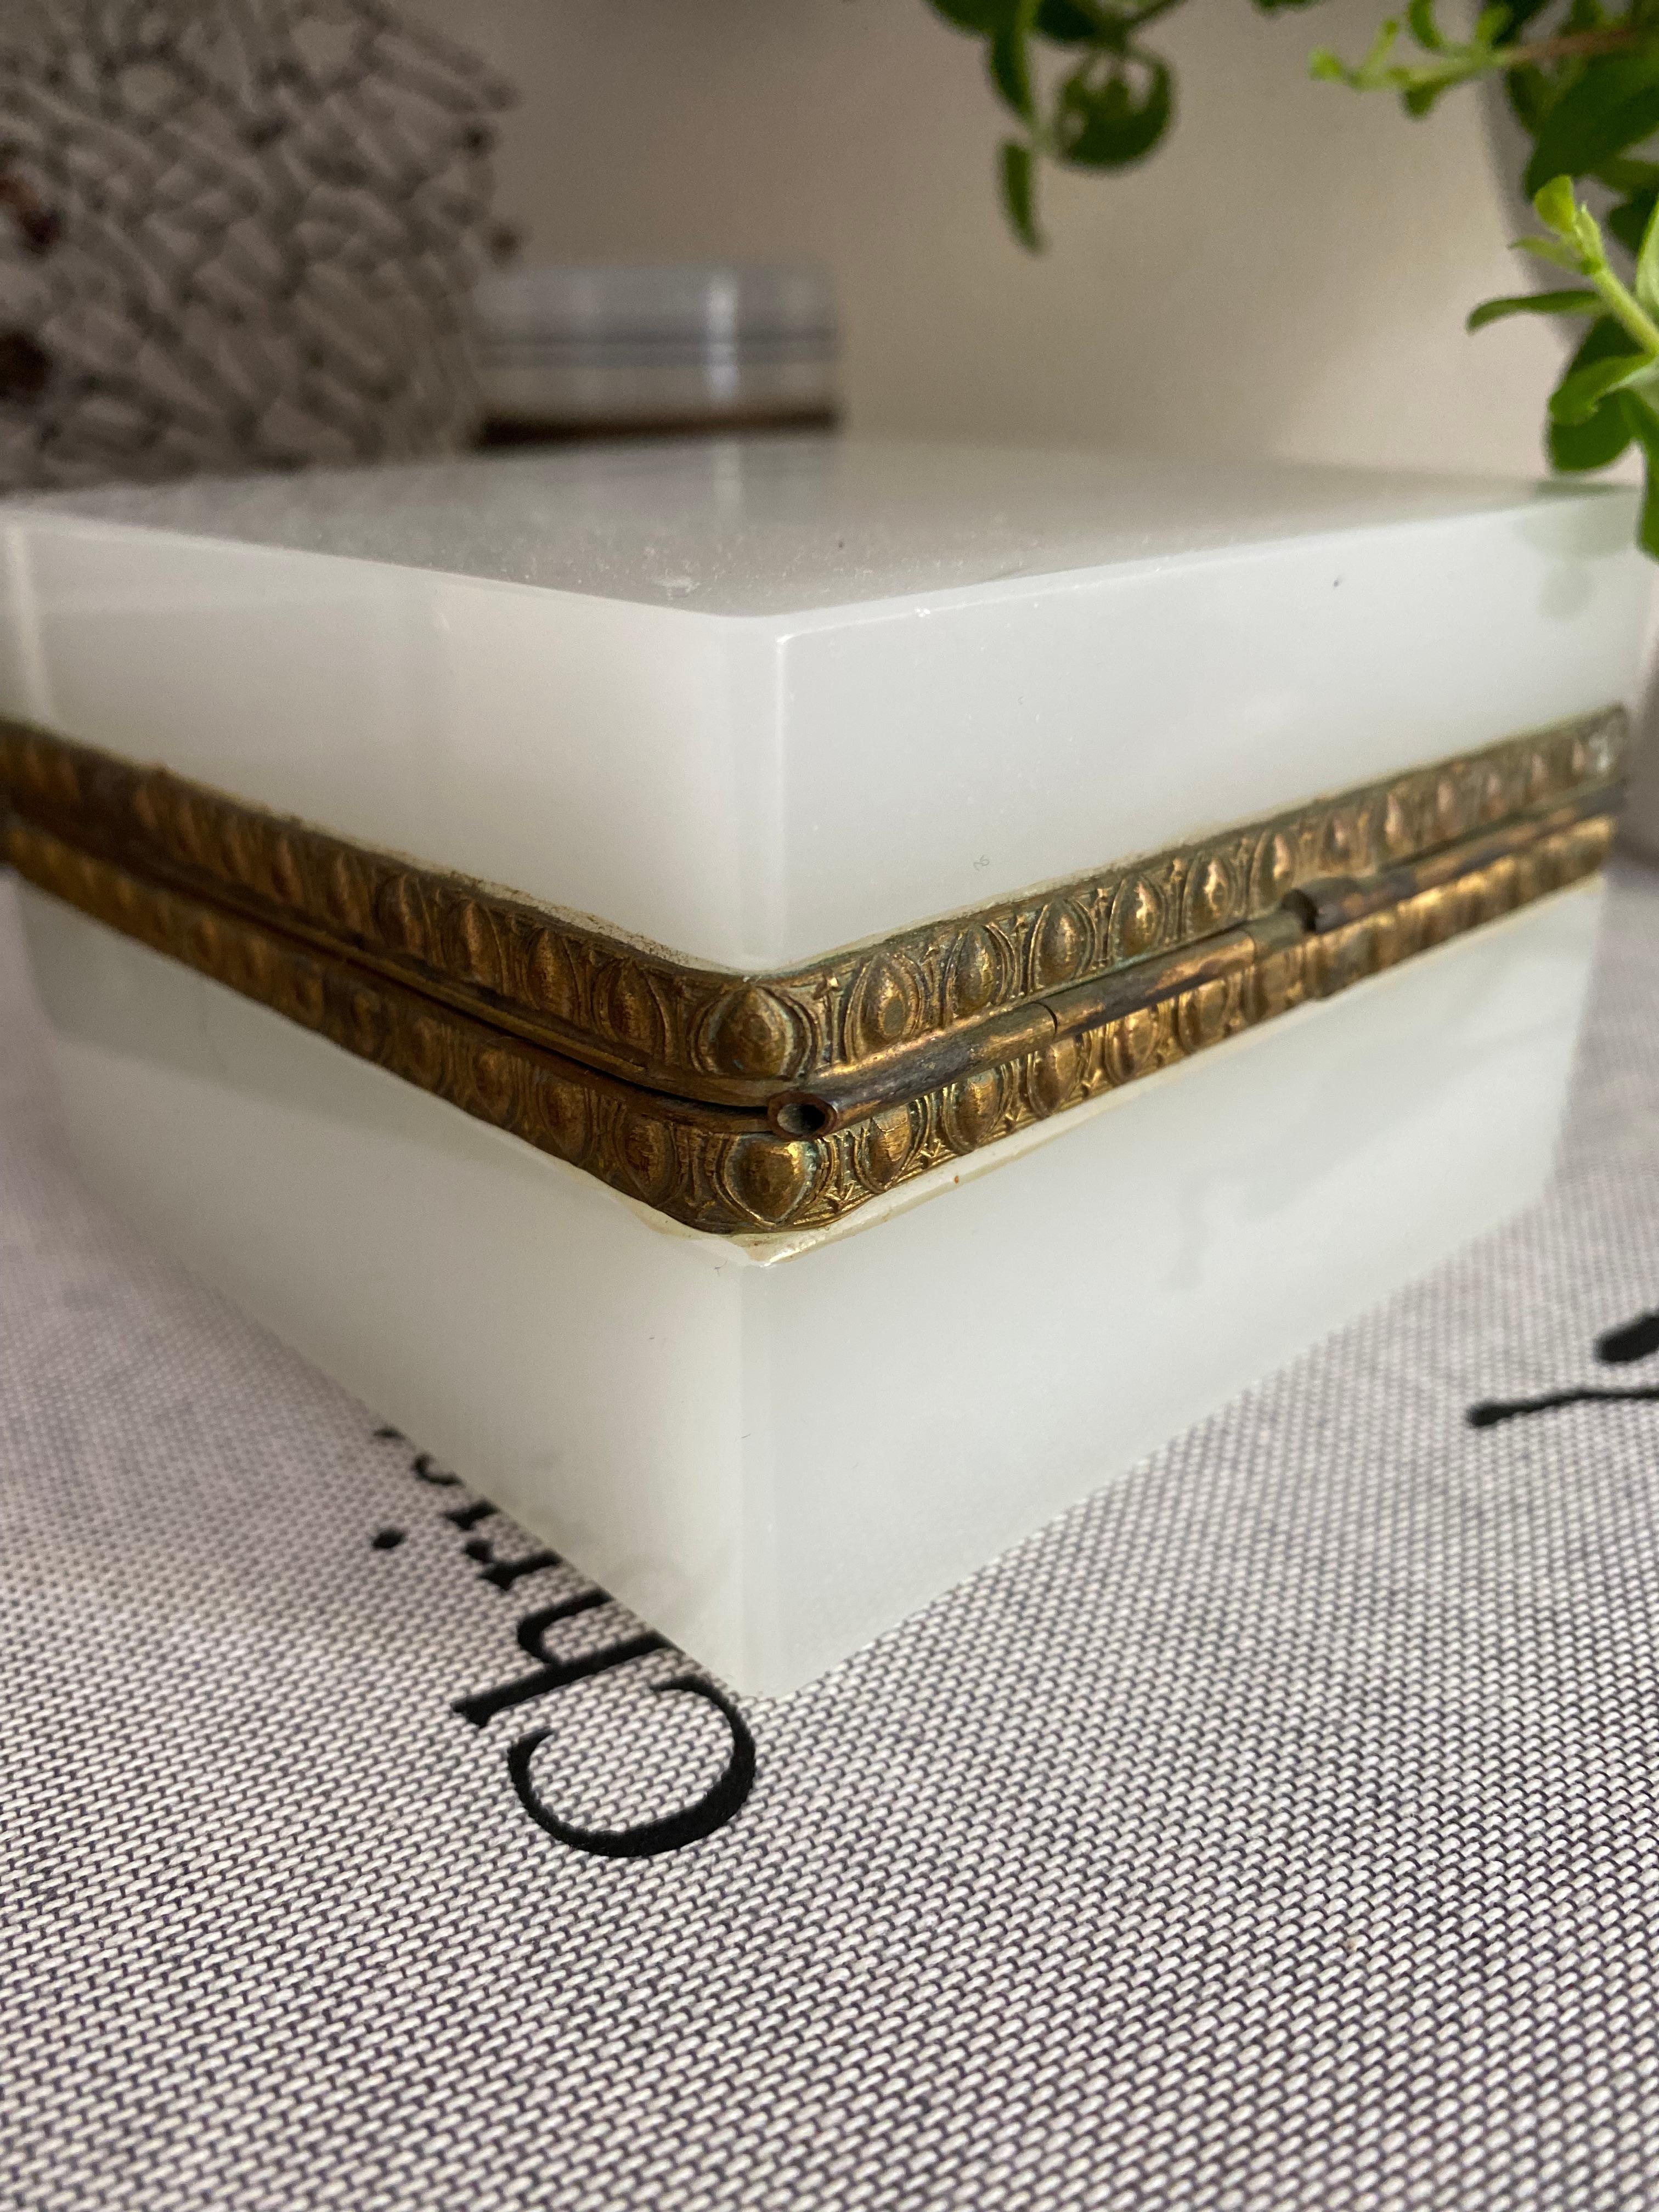 Bronze Antique white opaline glass box with beautiful decorated gilt hinge